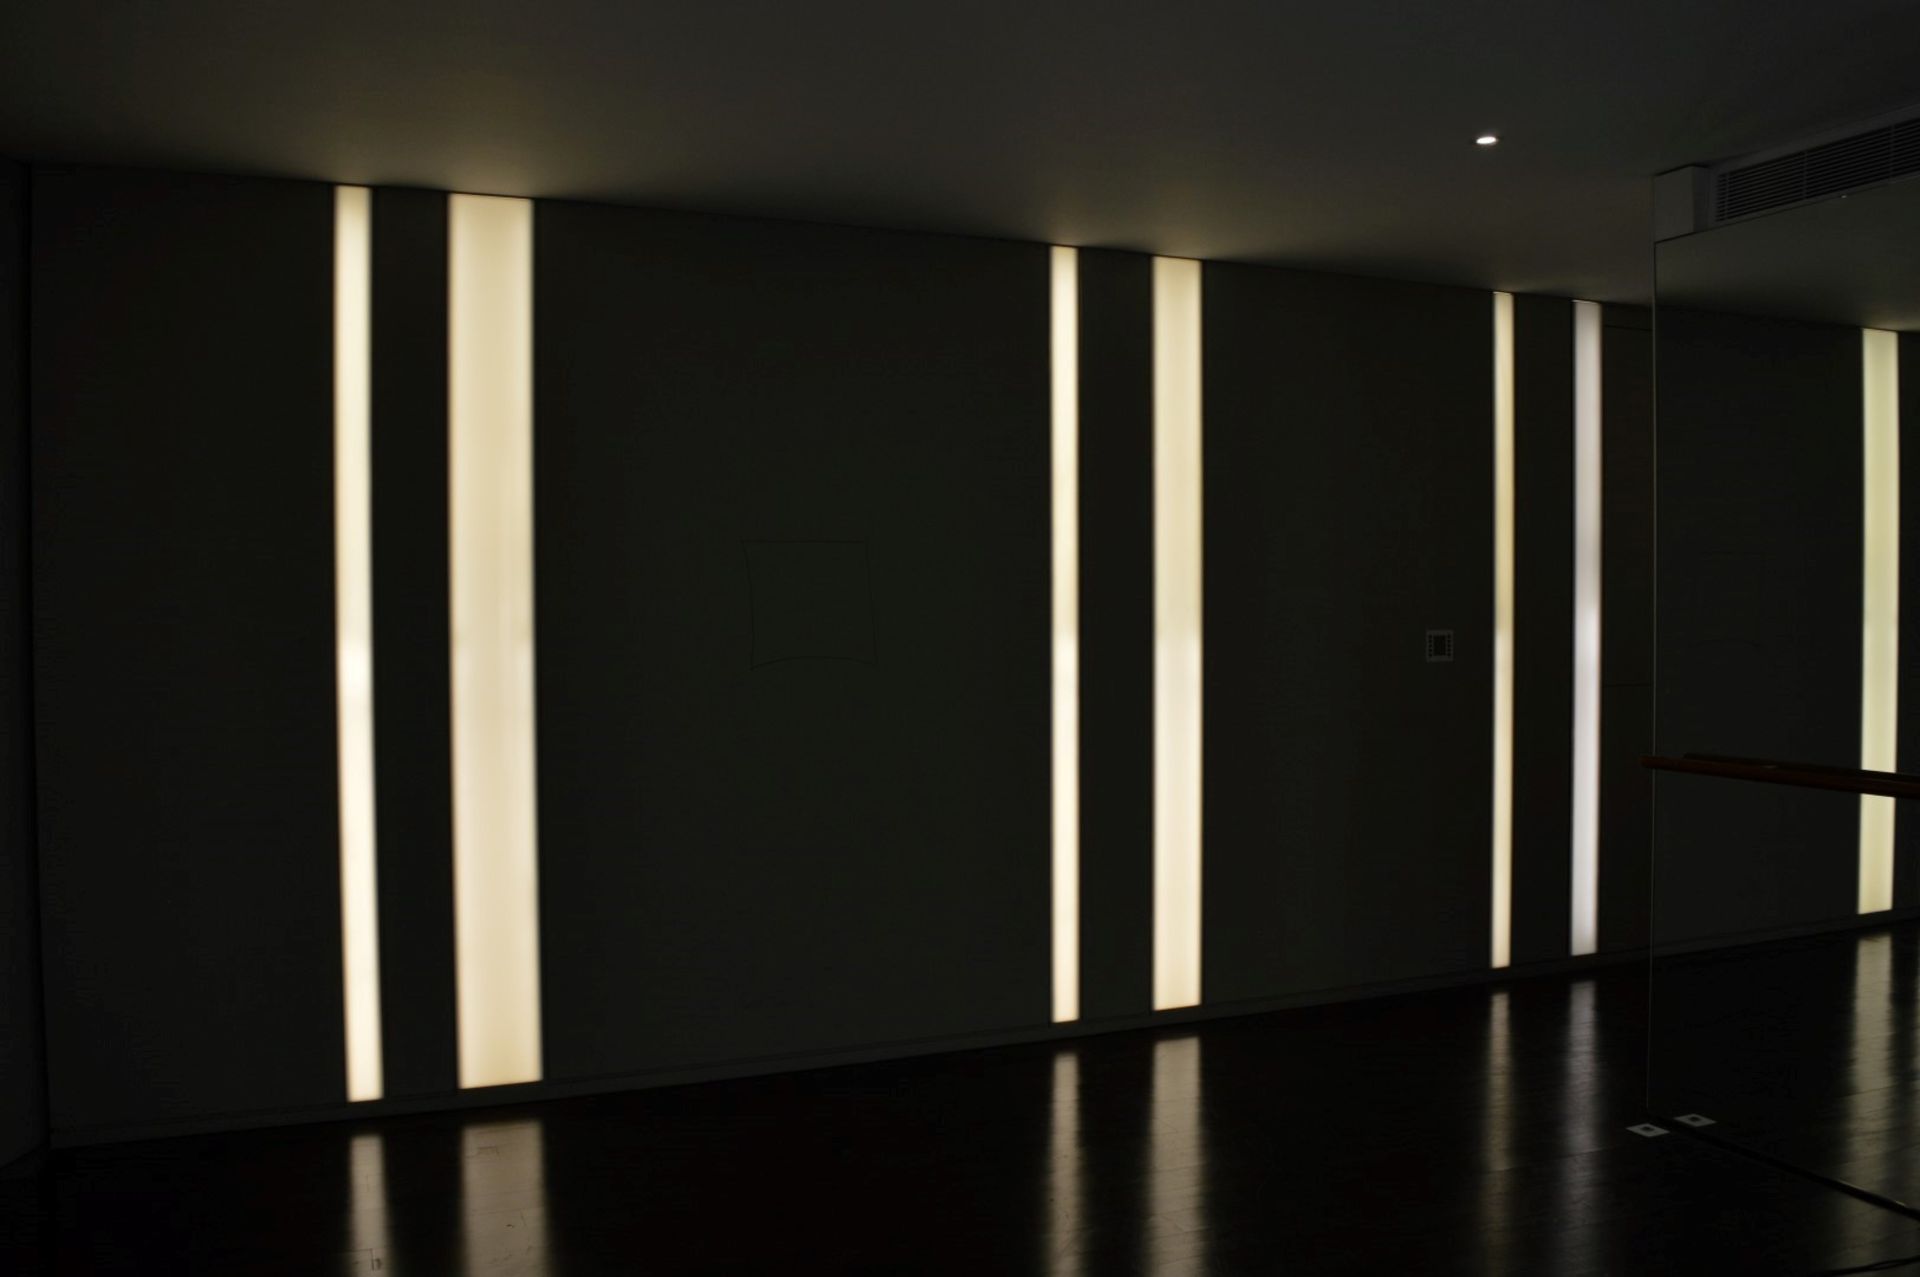 17 x Recessed Wall Light Fittings - Includes 34 x Tridonic Ballasts, Approx 68 x Tube Lights and - Image 2 of 15